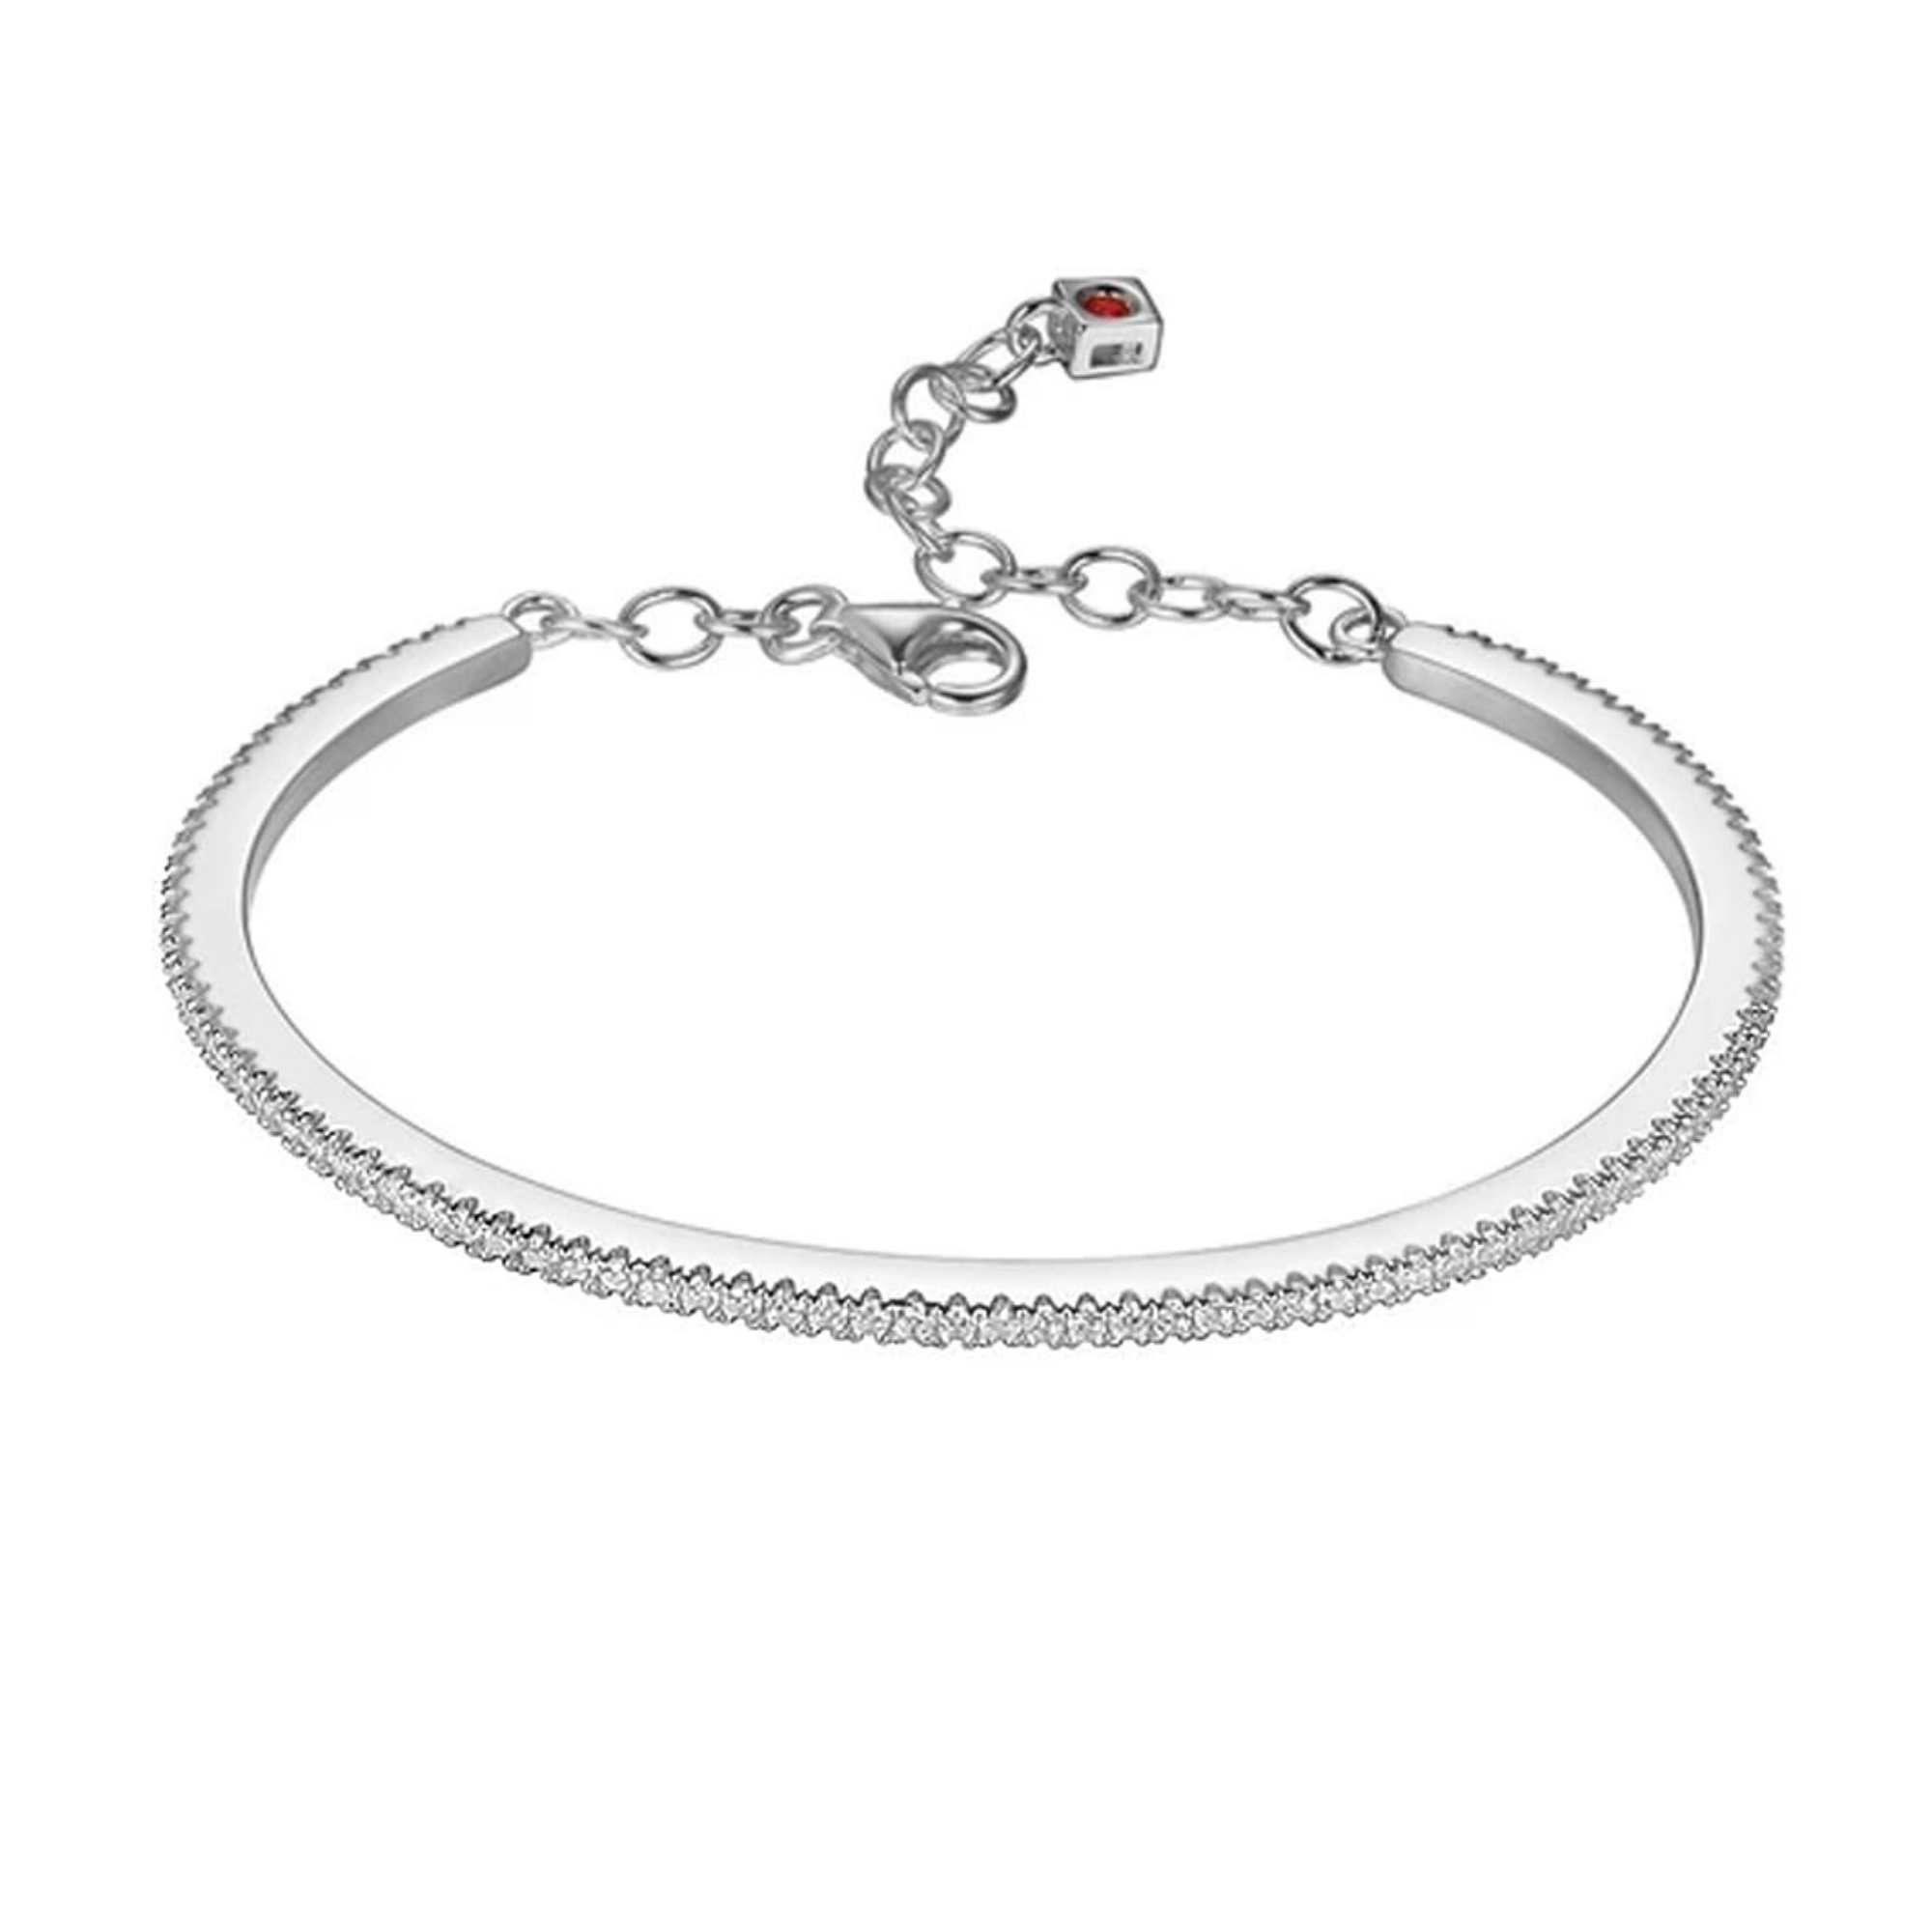 Elle CZ Cuff Bangle With Safety Chain and Ruby Logo, $145